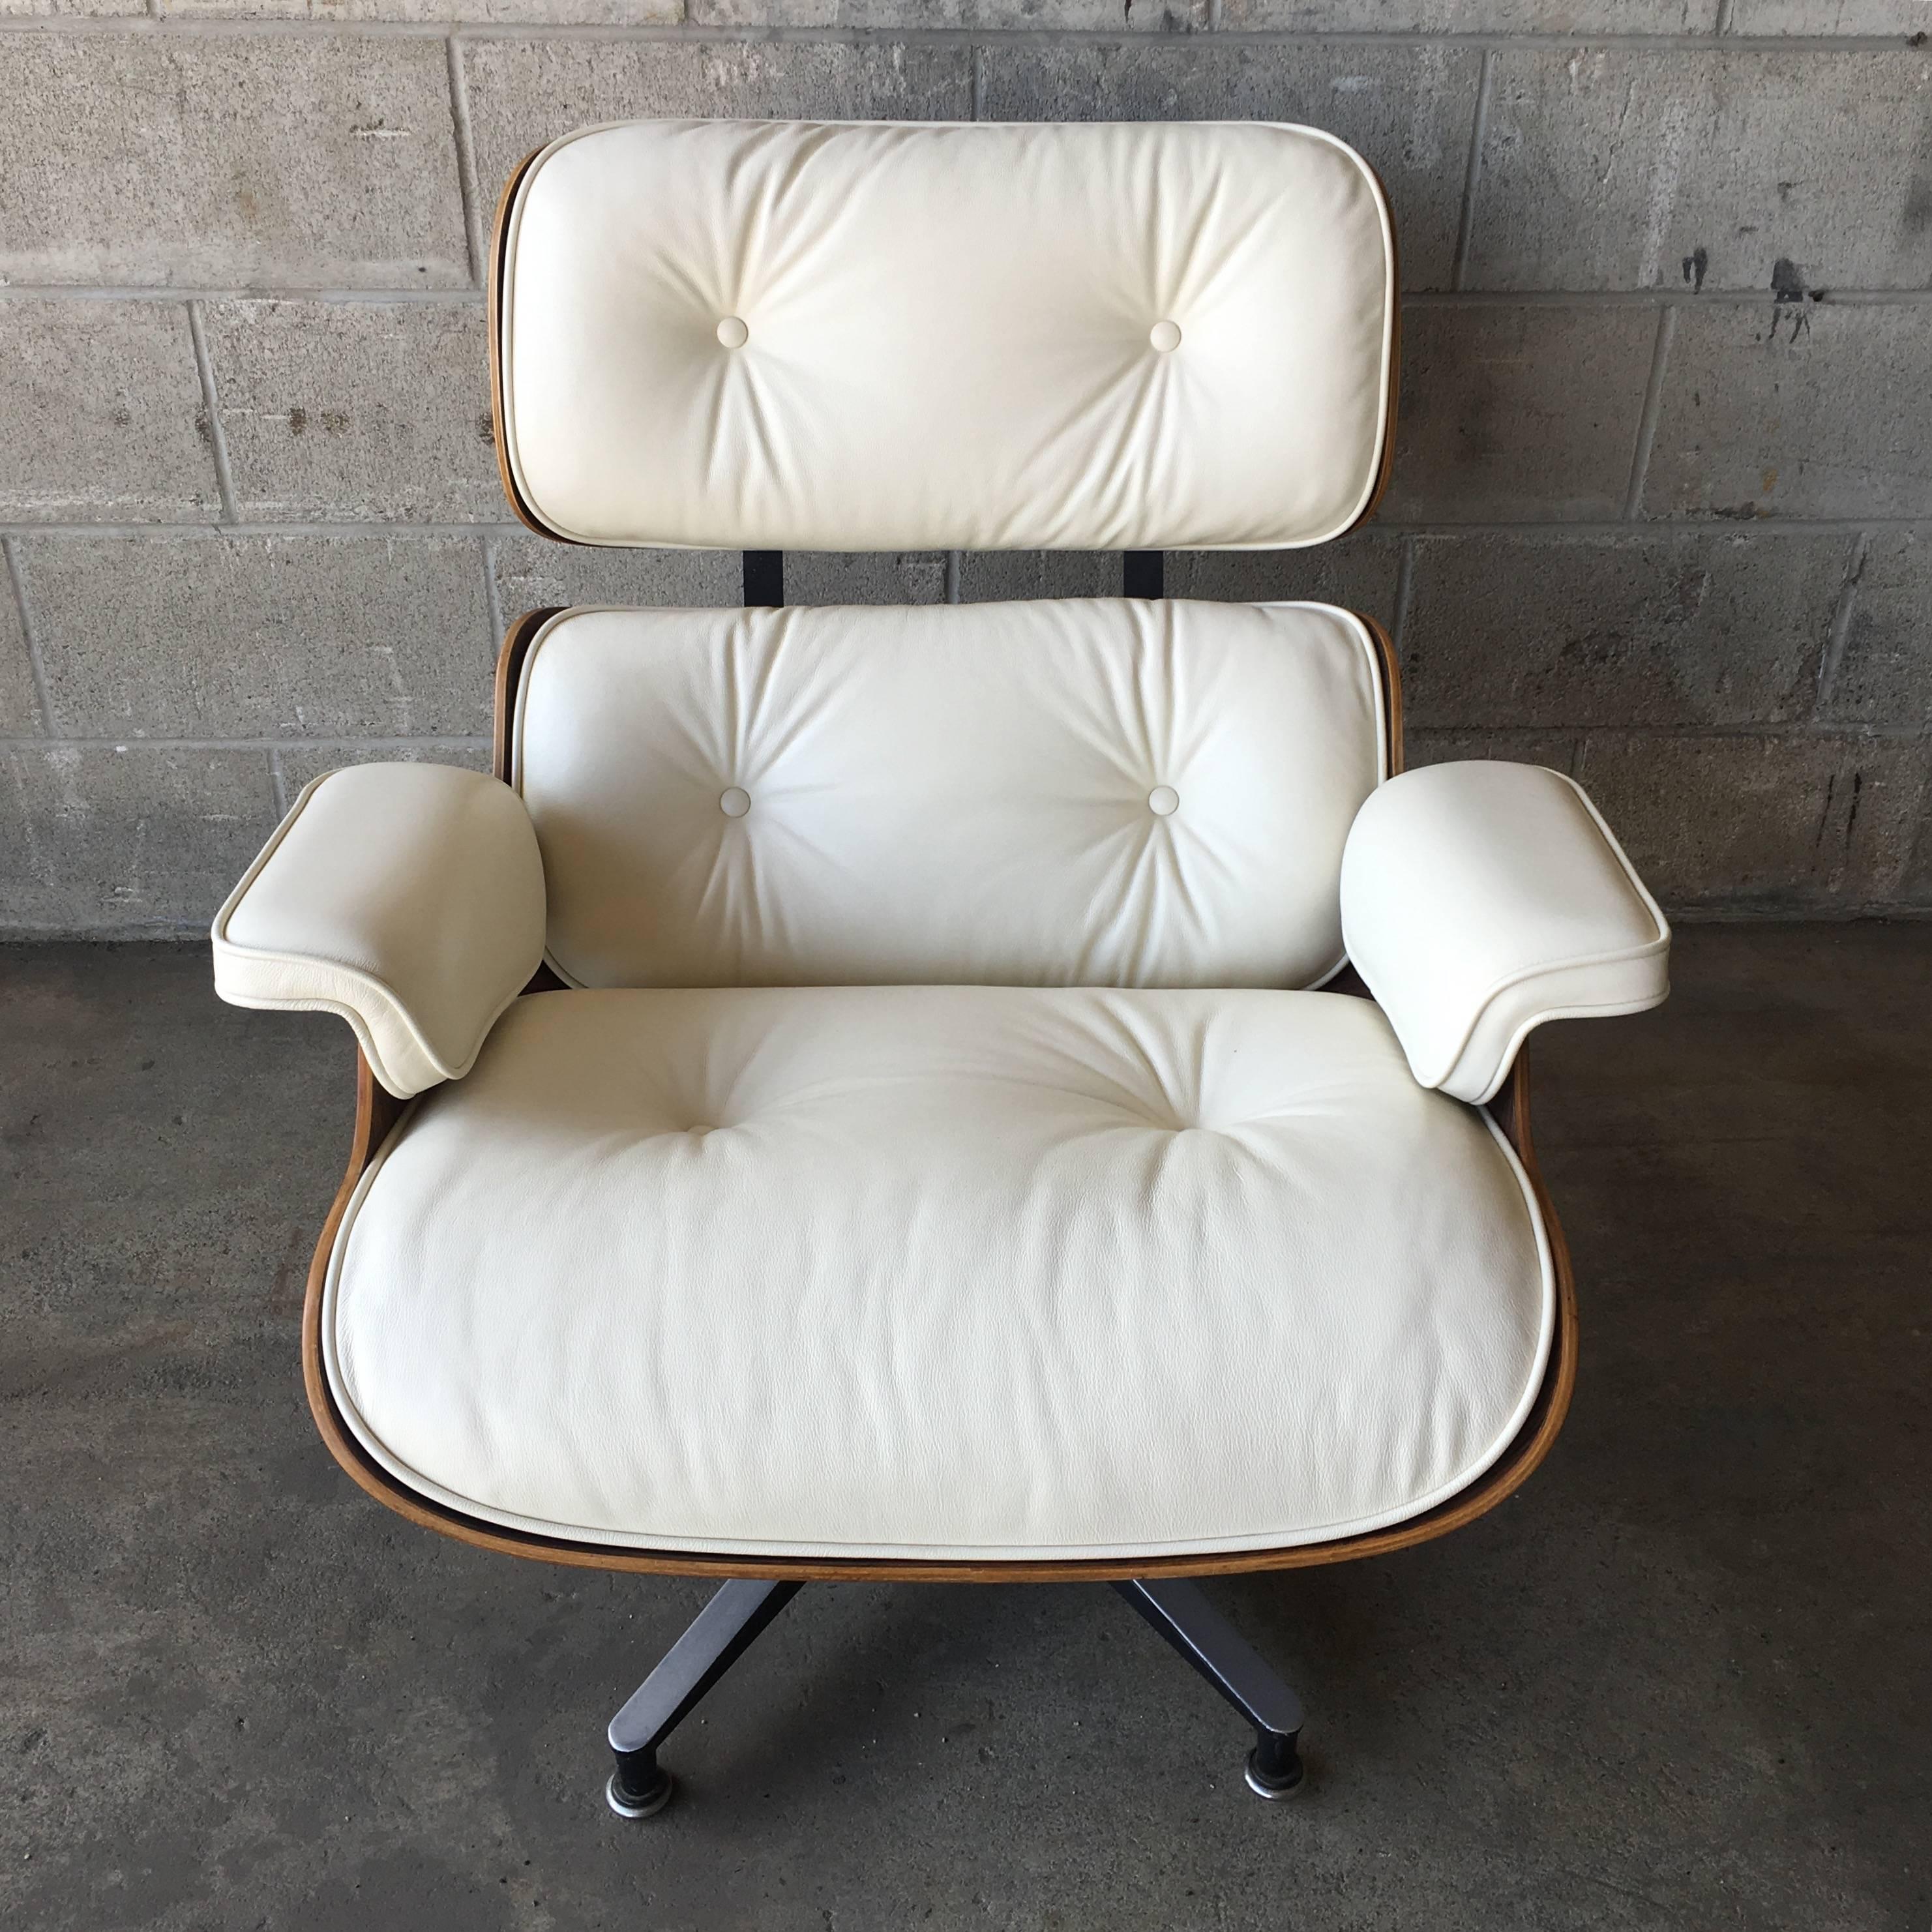 Rosewood Herman Miller Eames lounge chair and new ivory cushions in perfect condition. Impeccable wood color and grain detail. Cushions custom made to order with 3 week production time.